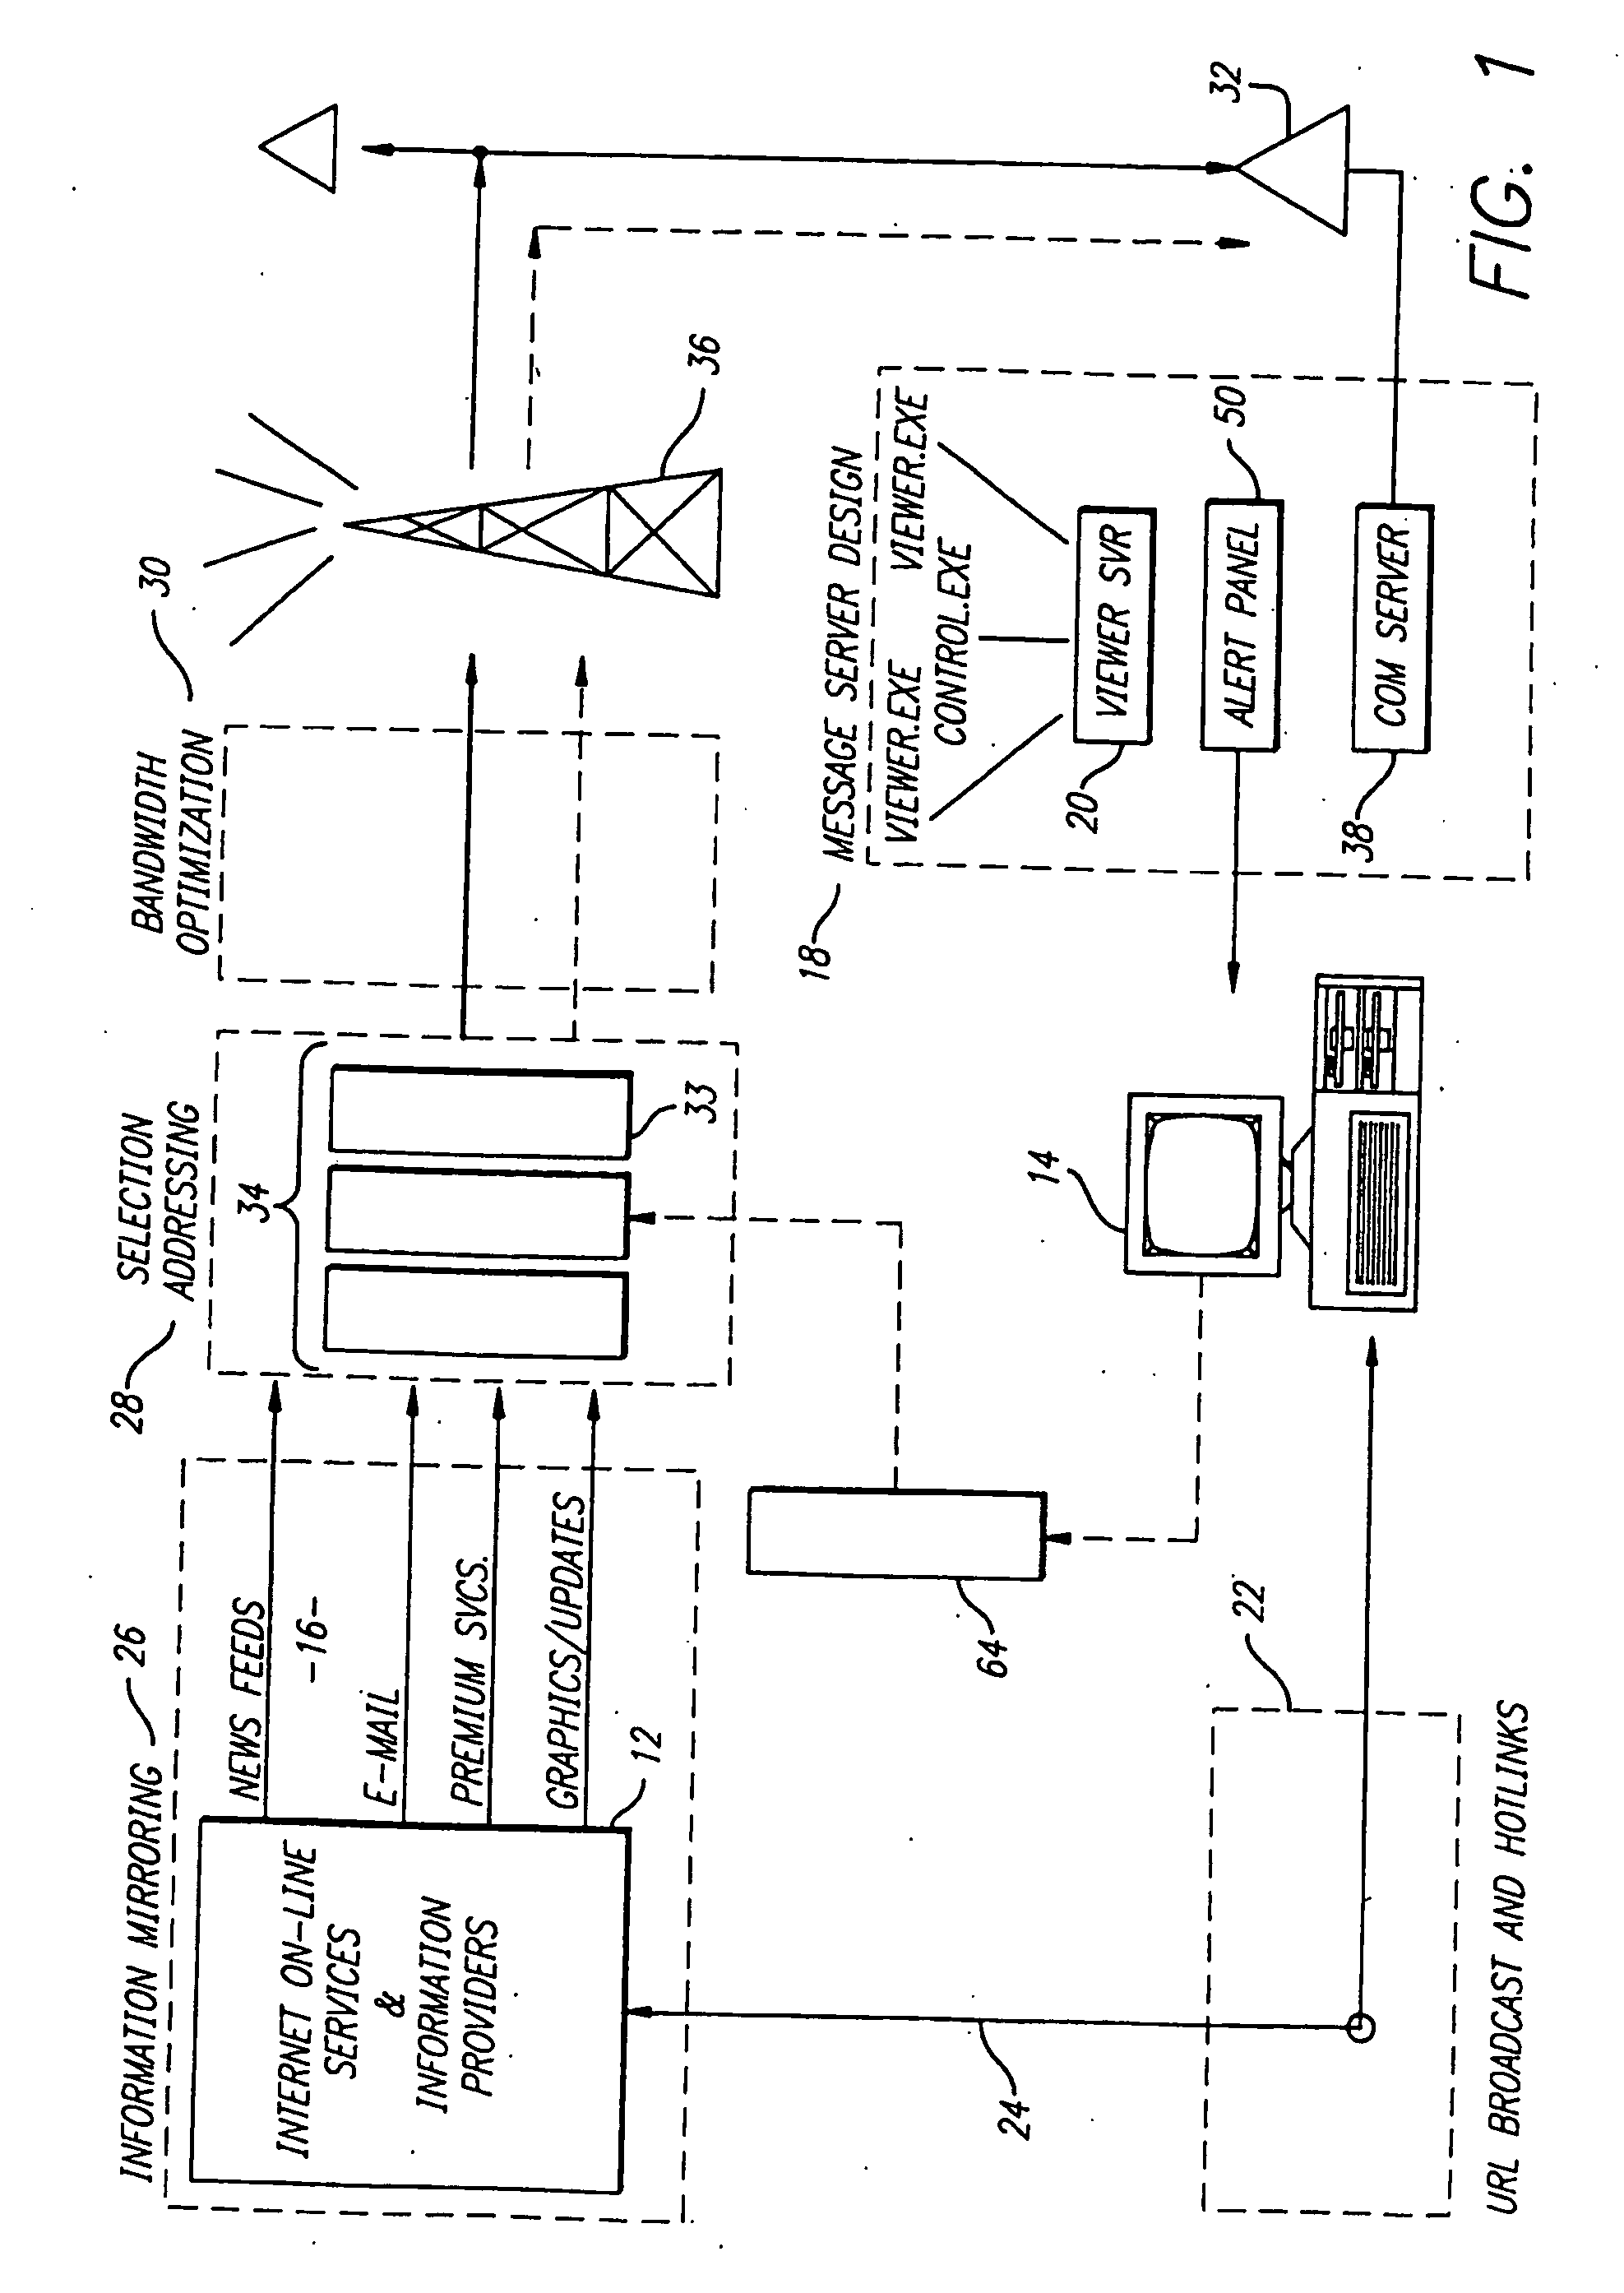 System and method for transmission of data